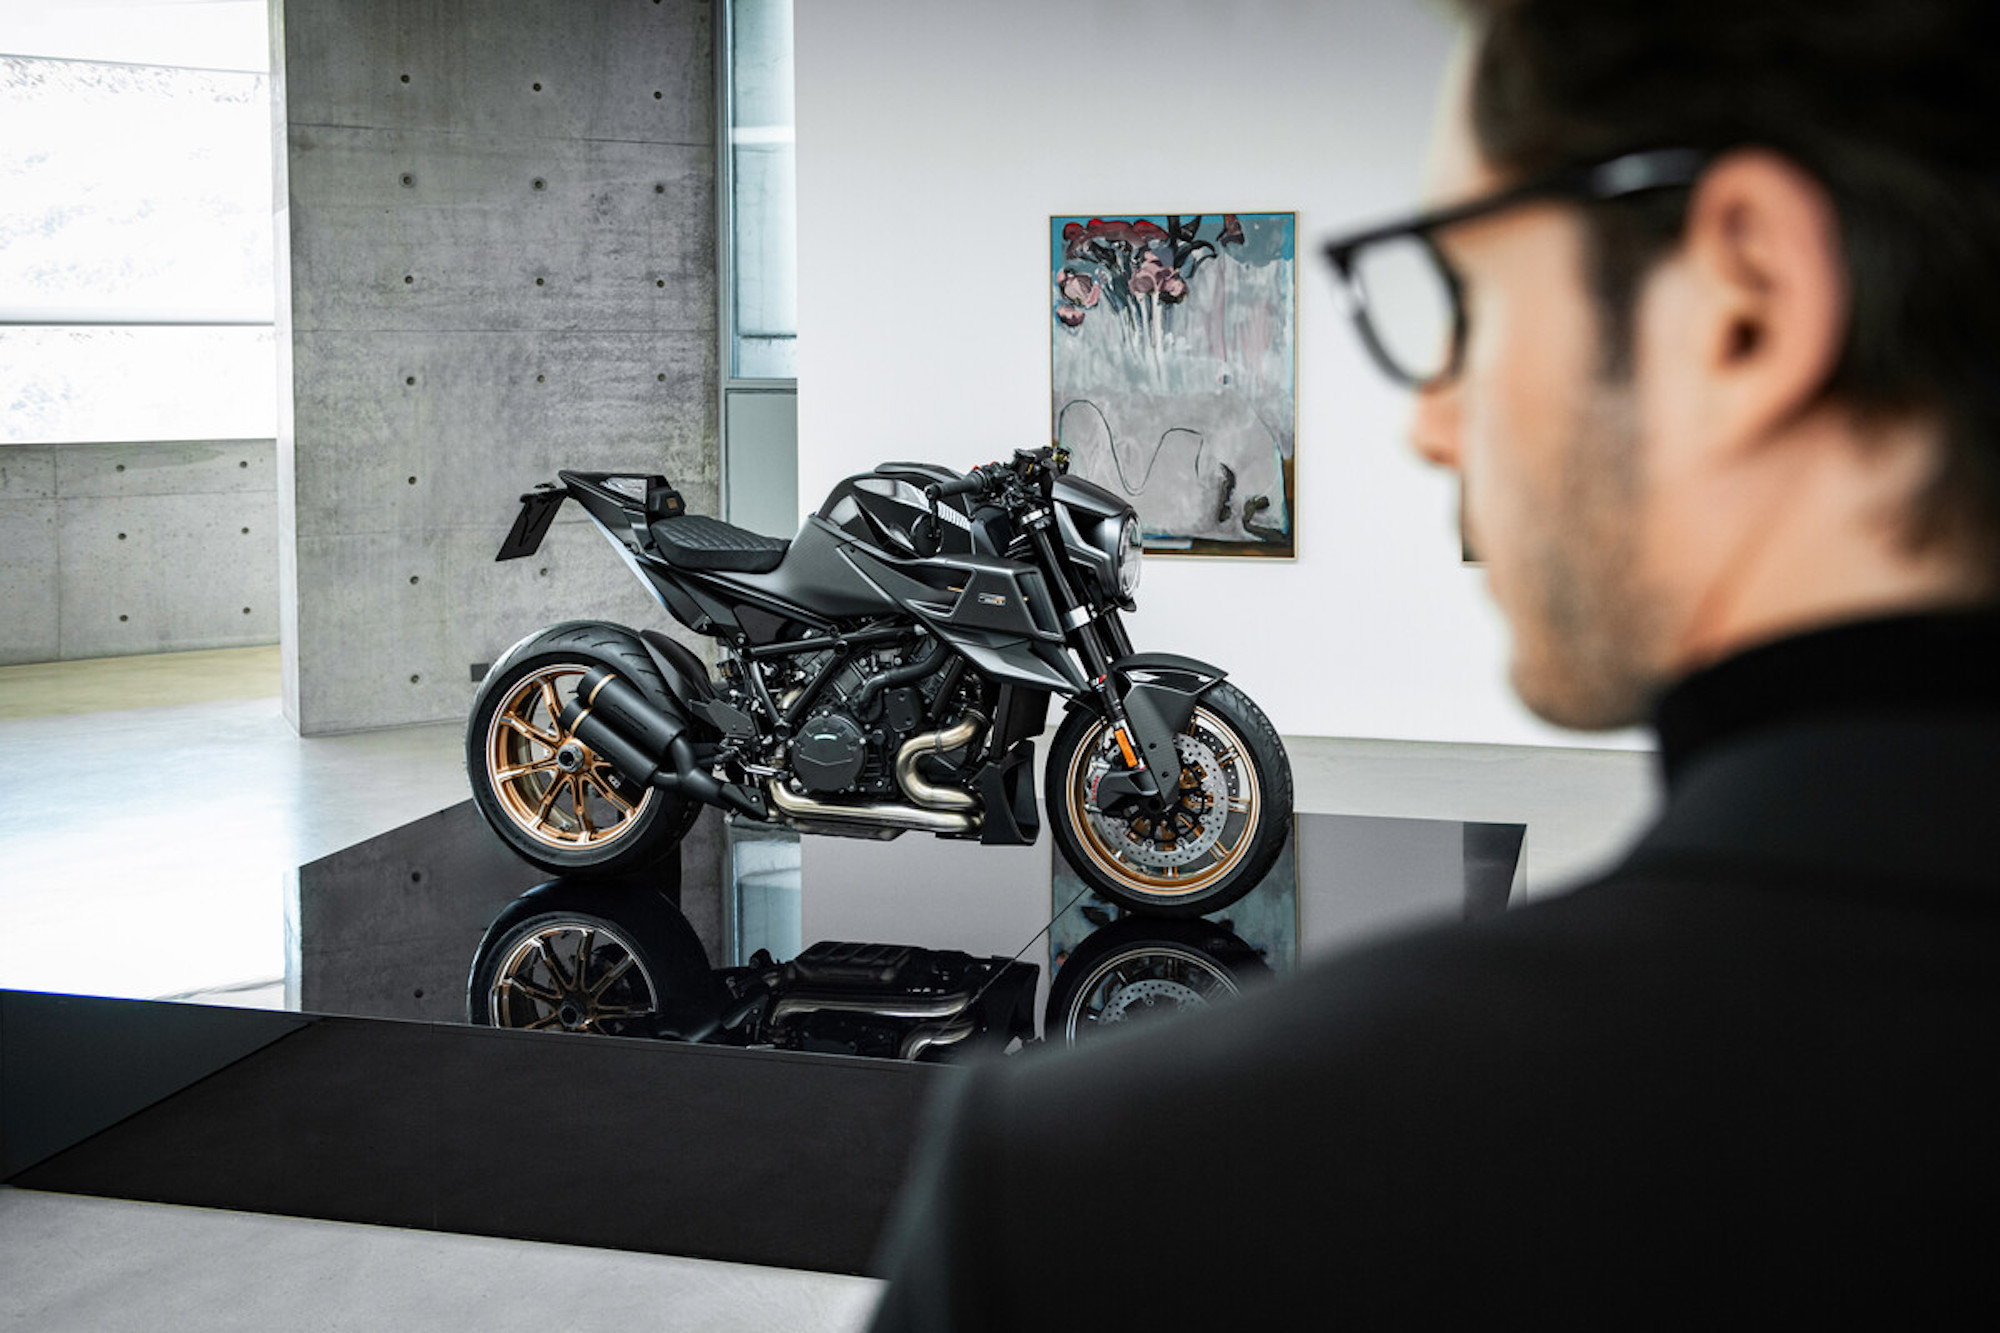 The final round of the KTM/BRABUS collection: The BRABUS 1300 R, Masterpiece Edition. All media provided by KTM's press release, honorable mention to BRABUS.